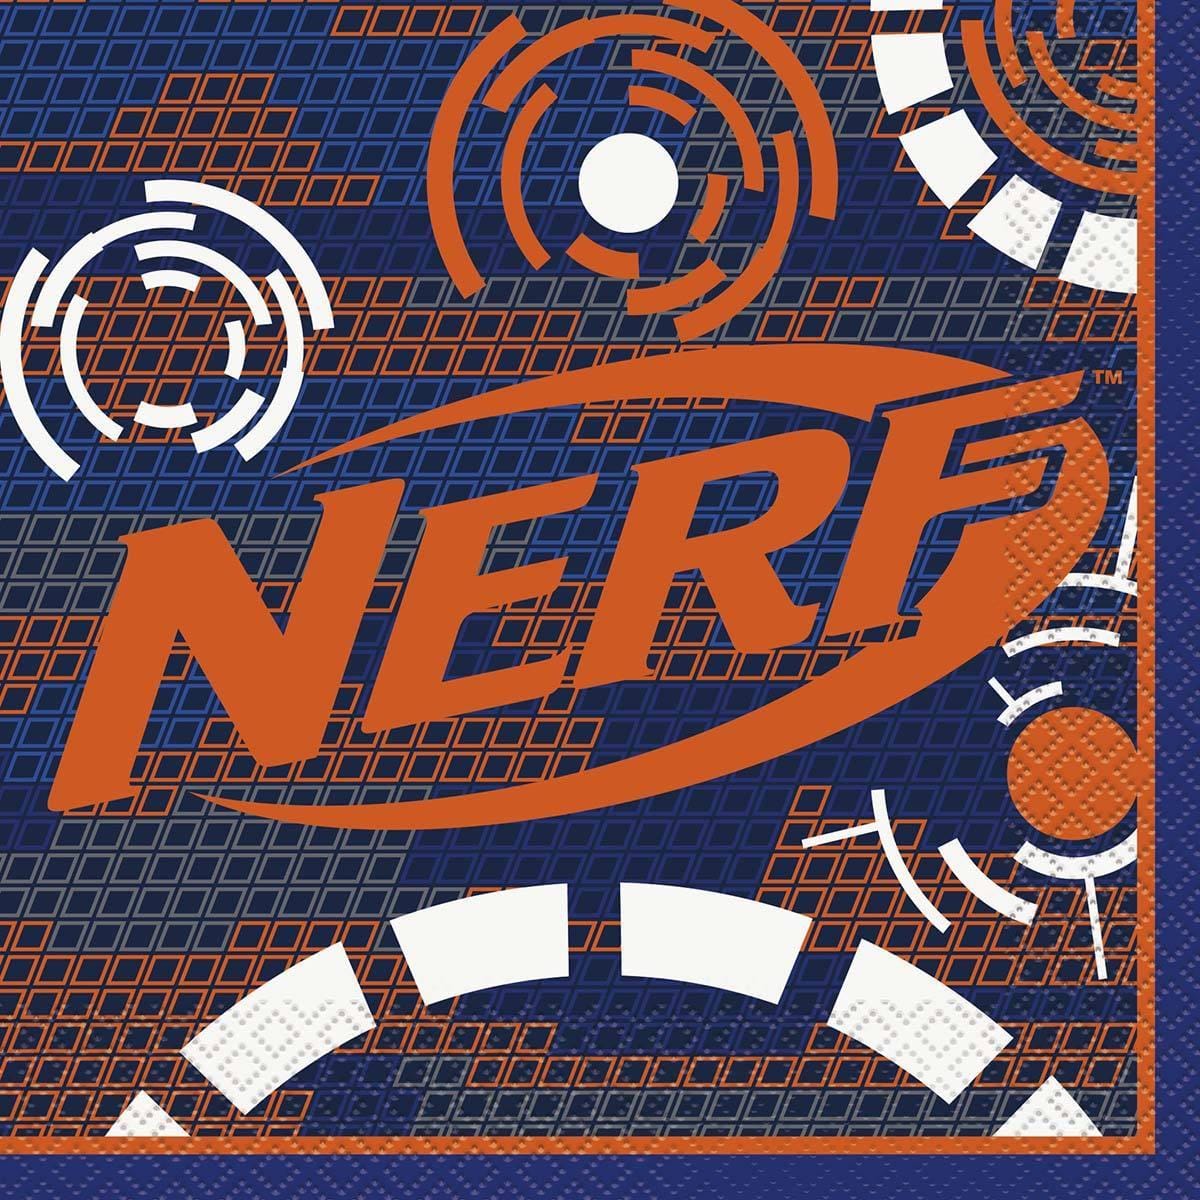 Buy Kids Birthday Nerf lunch napkins, 16 per package sold at Party Expert